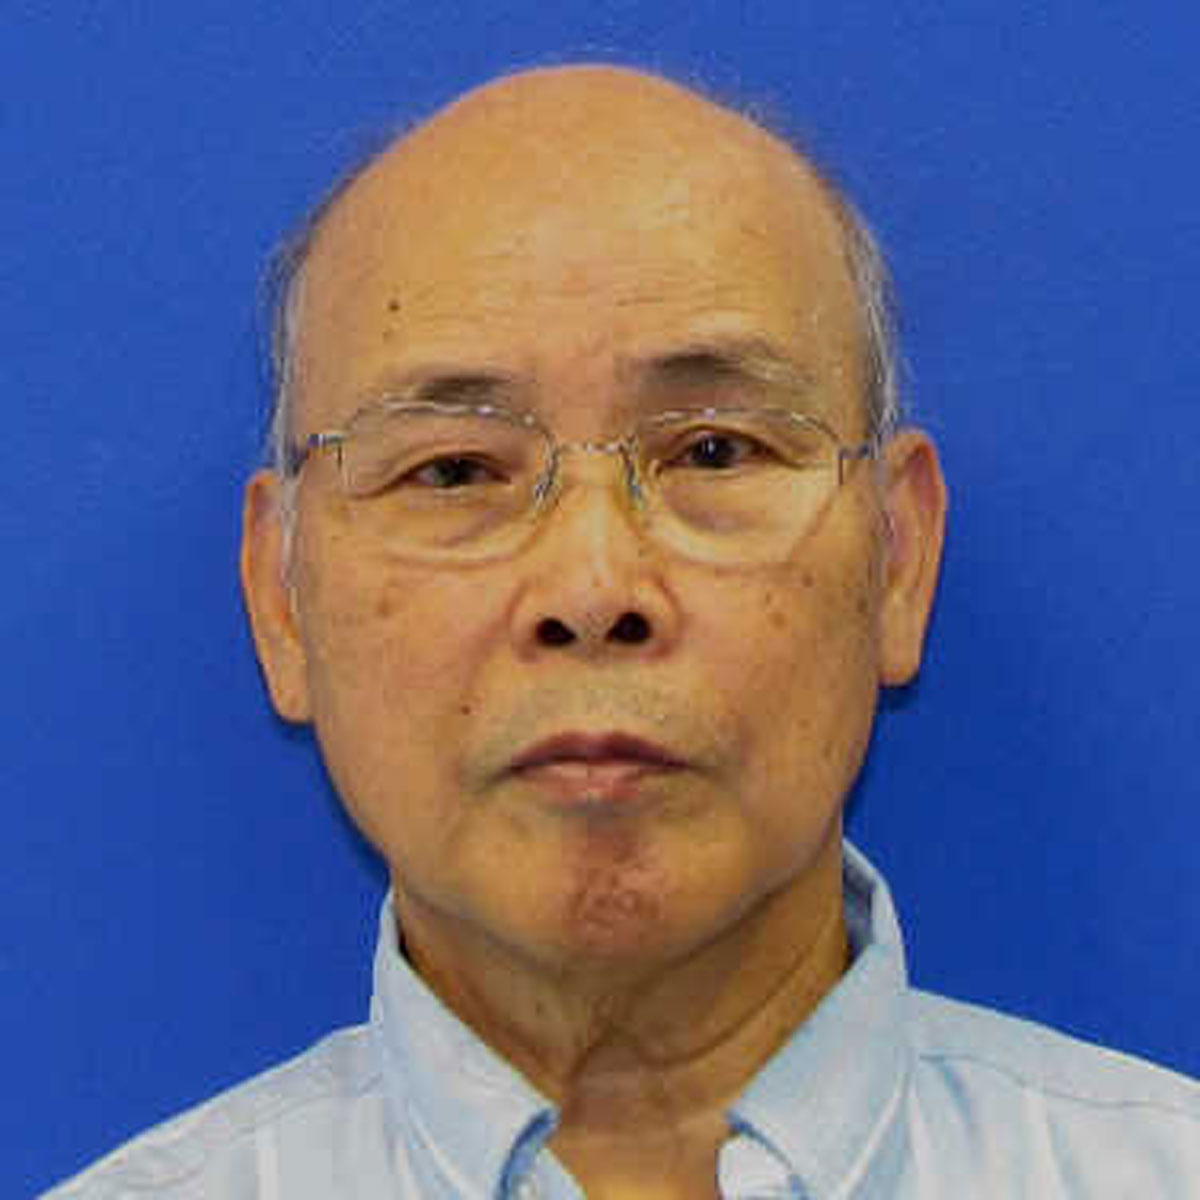 Missing Md. man, 72, located